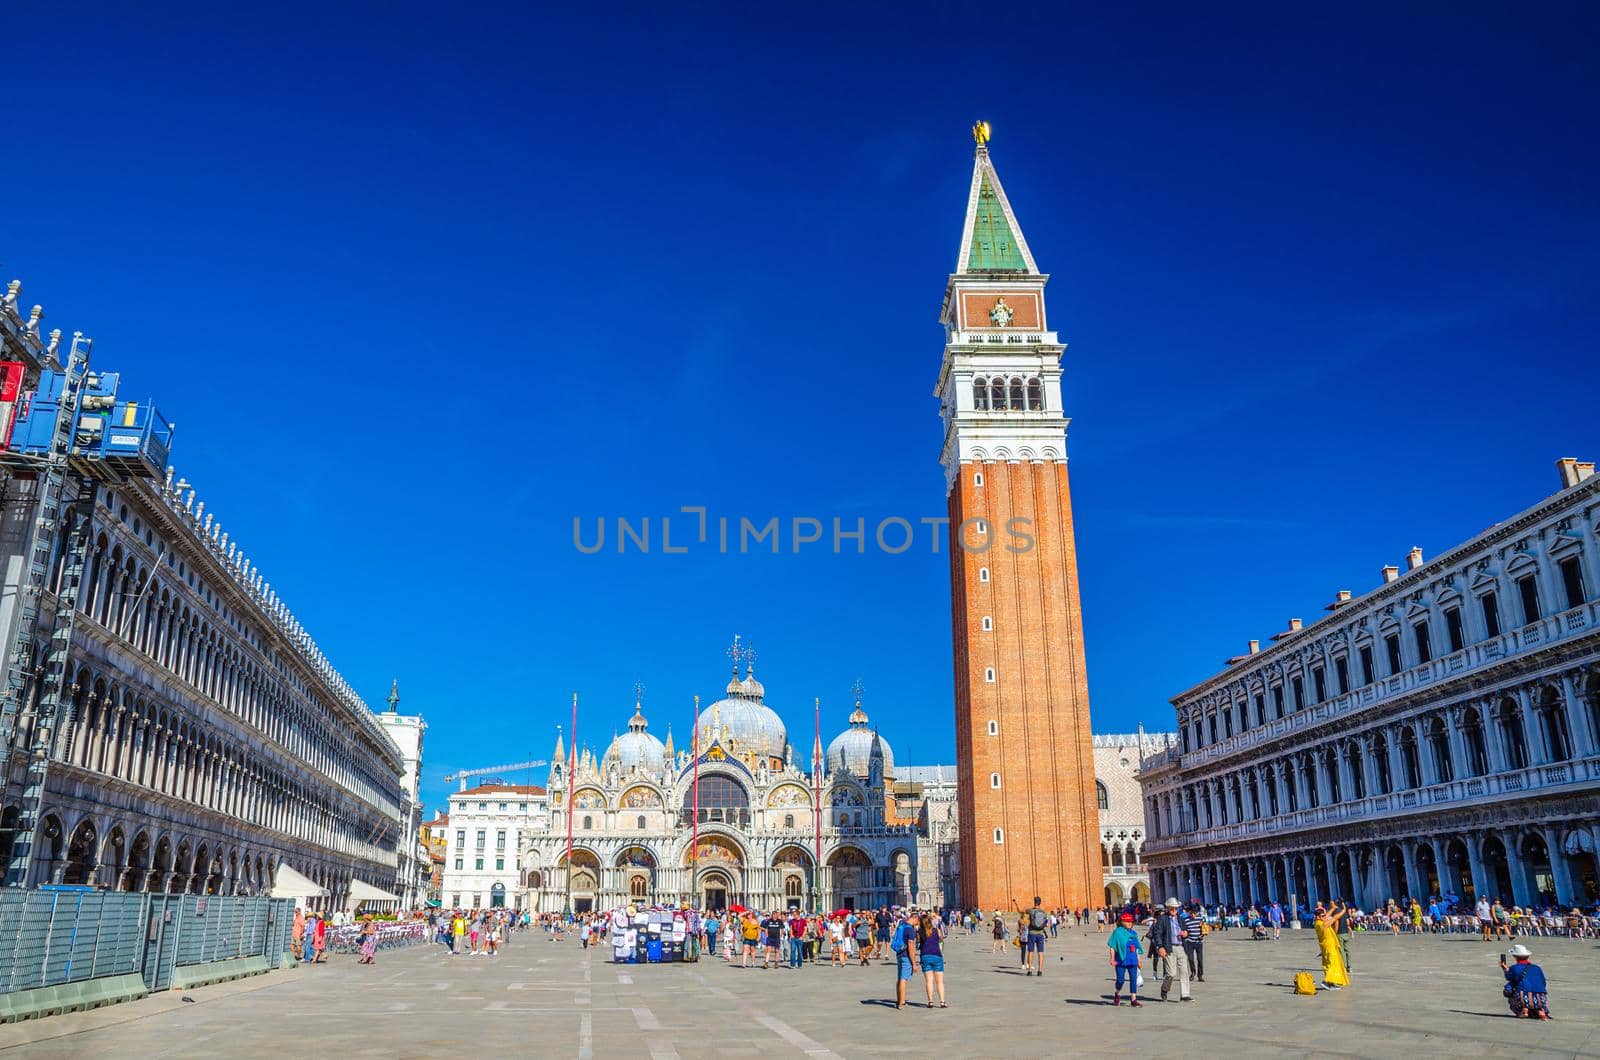 Venice, Italy, September 13, 2019: Piazza San Marco St Mark's Square, Patriarchal Cathedral Basilica of Saint Mark Archdiocese, Procuratie Vecchie and Campanile bell tower, blue sky, Veneto Region